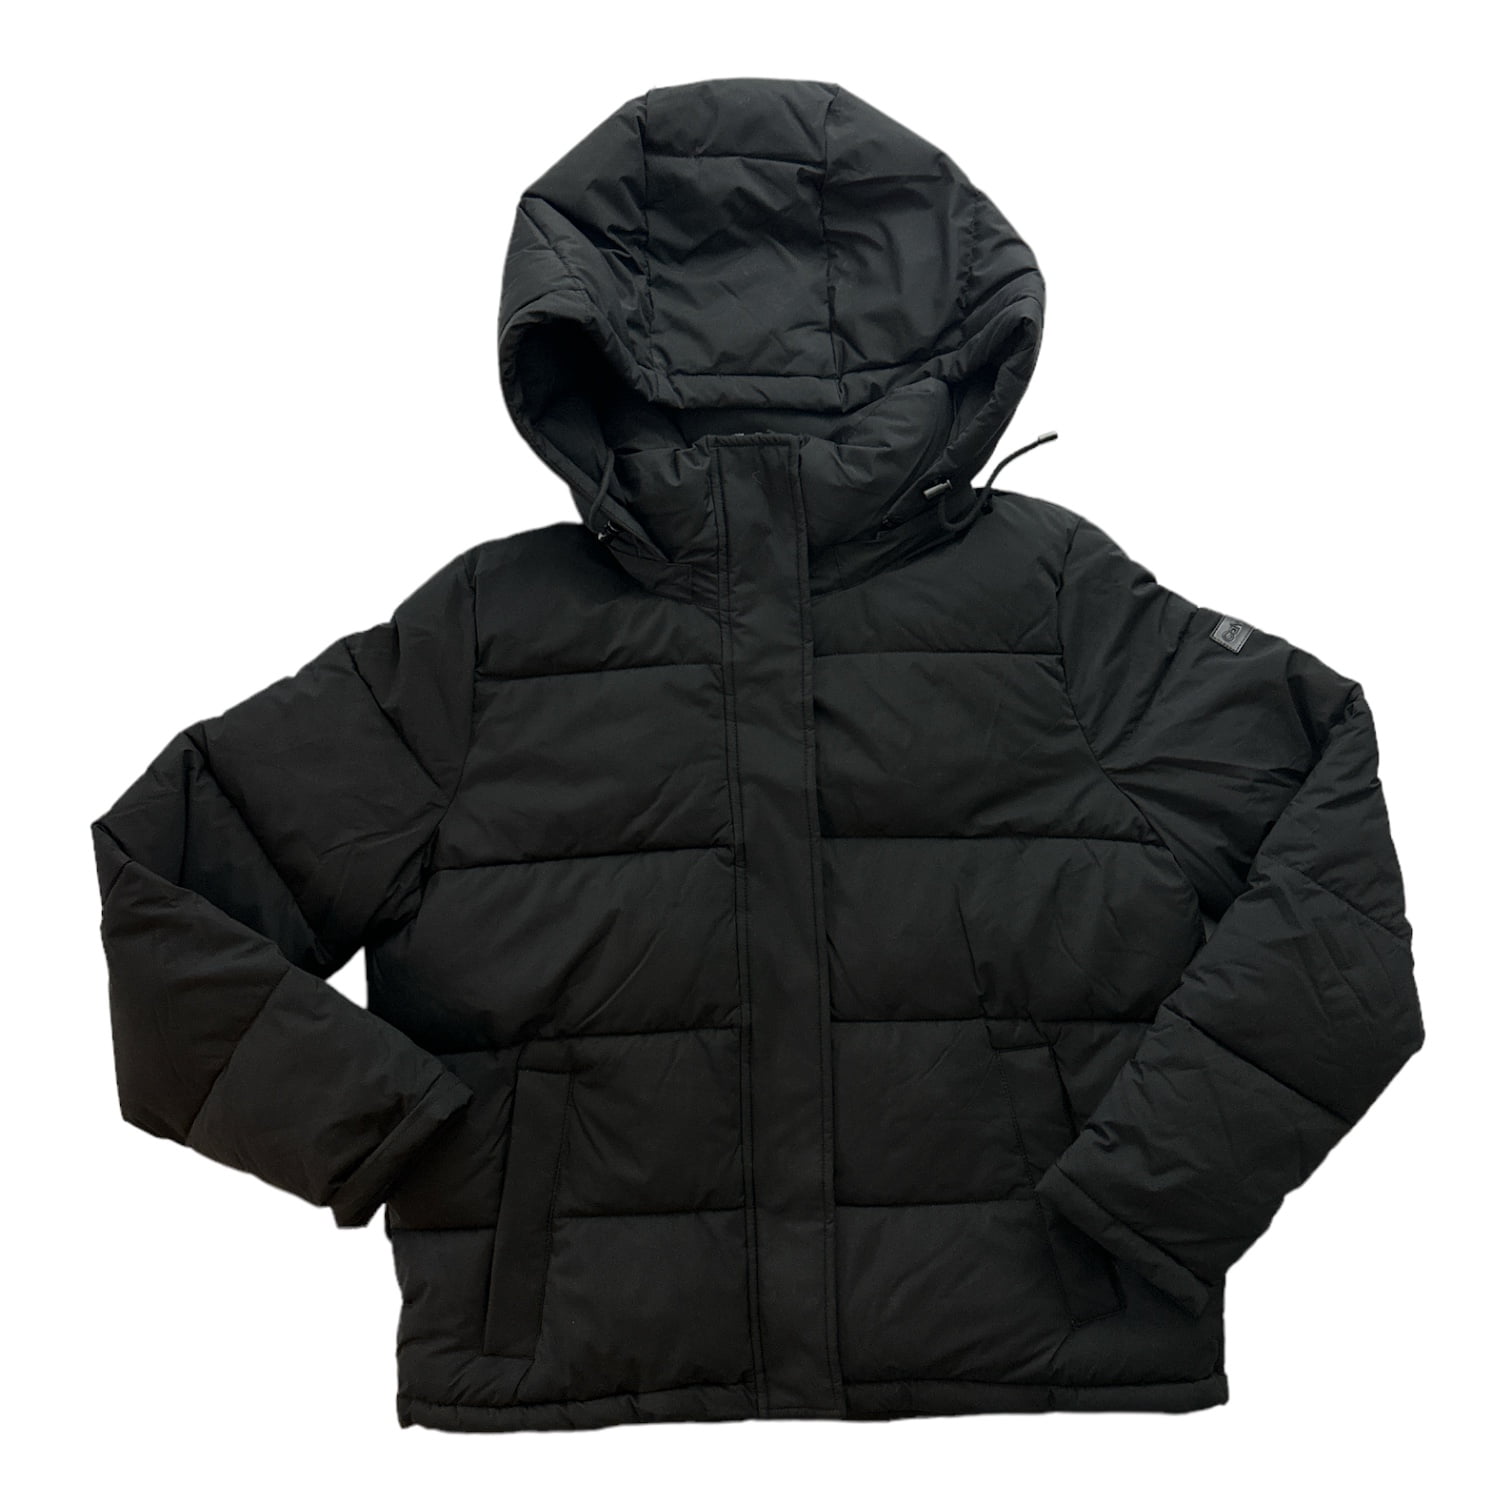 3-in-1 water resistant hooded jacket - Calvin Klein, got this at Costco for  a lot less